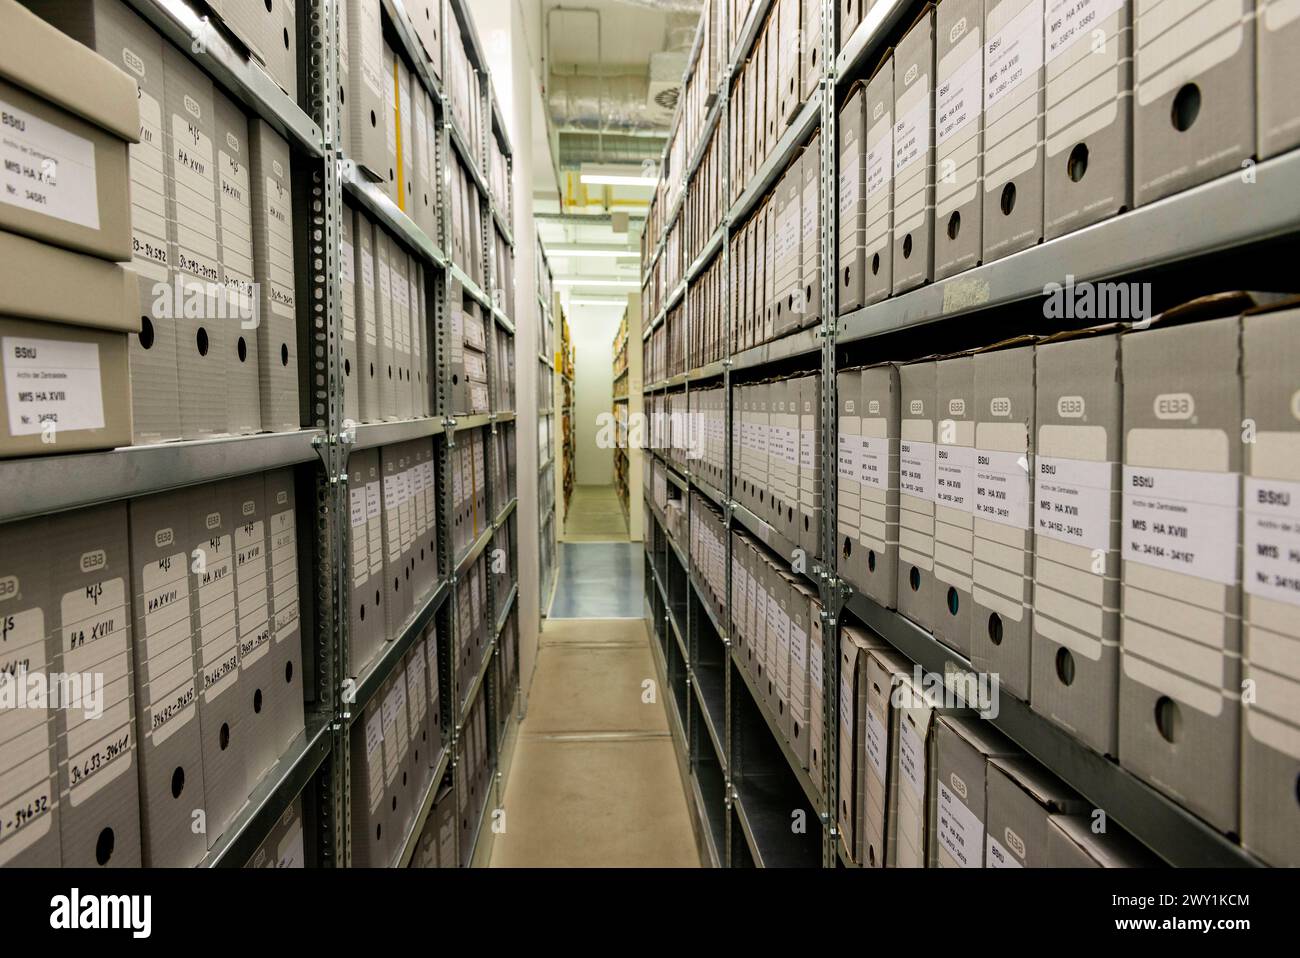 Stasi Archives: Files and Folders in Huge Storage Space The Federal Organisation: BStU is responsible for storing, restoring and accesing the Archives of the former MfS / East-German Stasi Intelligence Service. In huge rooms approximately 111 Kilometers of files, folders and documents are being stored and researched. Berlin, Germany. Berlin Stasi Archives / Stasi Museum Berlin Germany Copyright: xGuidoxKoppesx Stock Photo